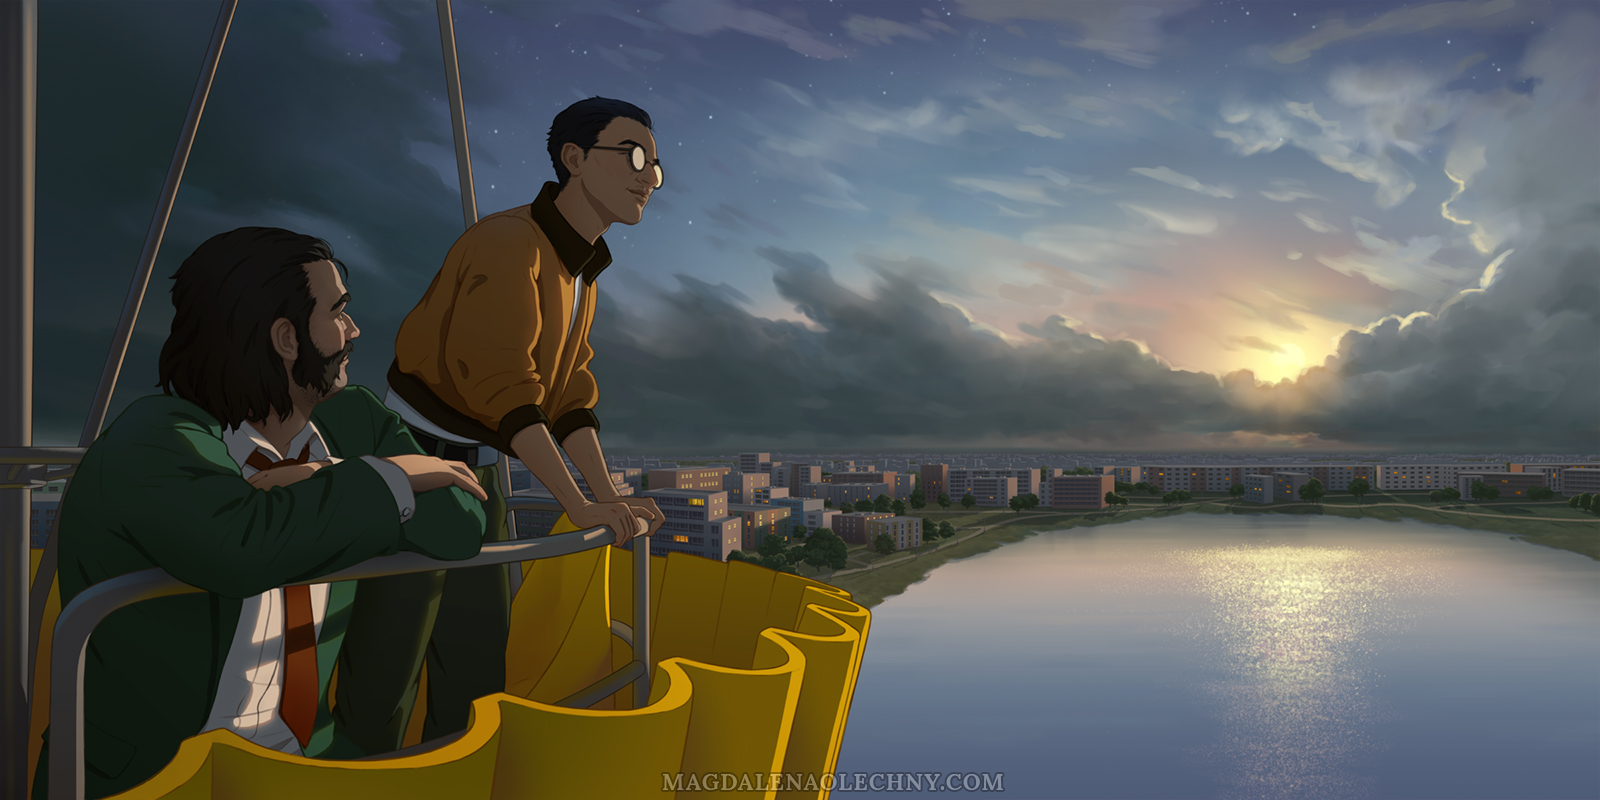 A digital illustration depicting Harry du Bois and Kim Kitsuragi, characters from the game Disco Elysium. They are high up in a Ferris wheel gondola. The sky is filled with stormy clouds.